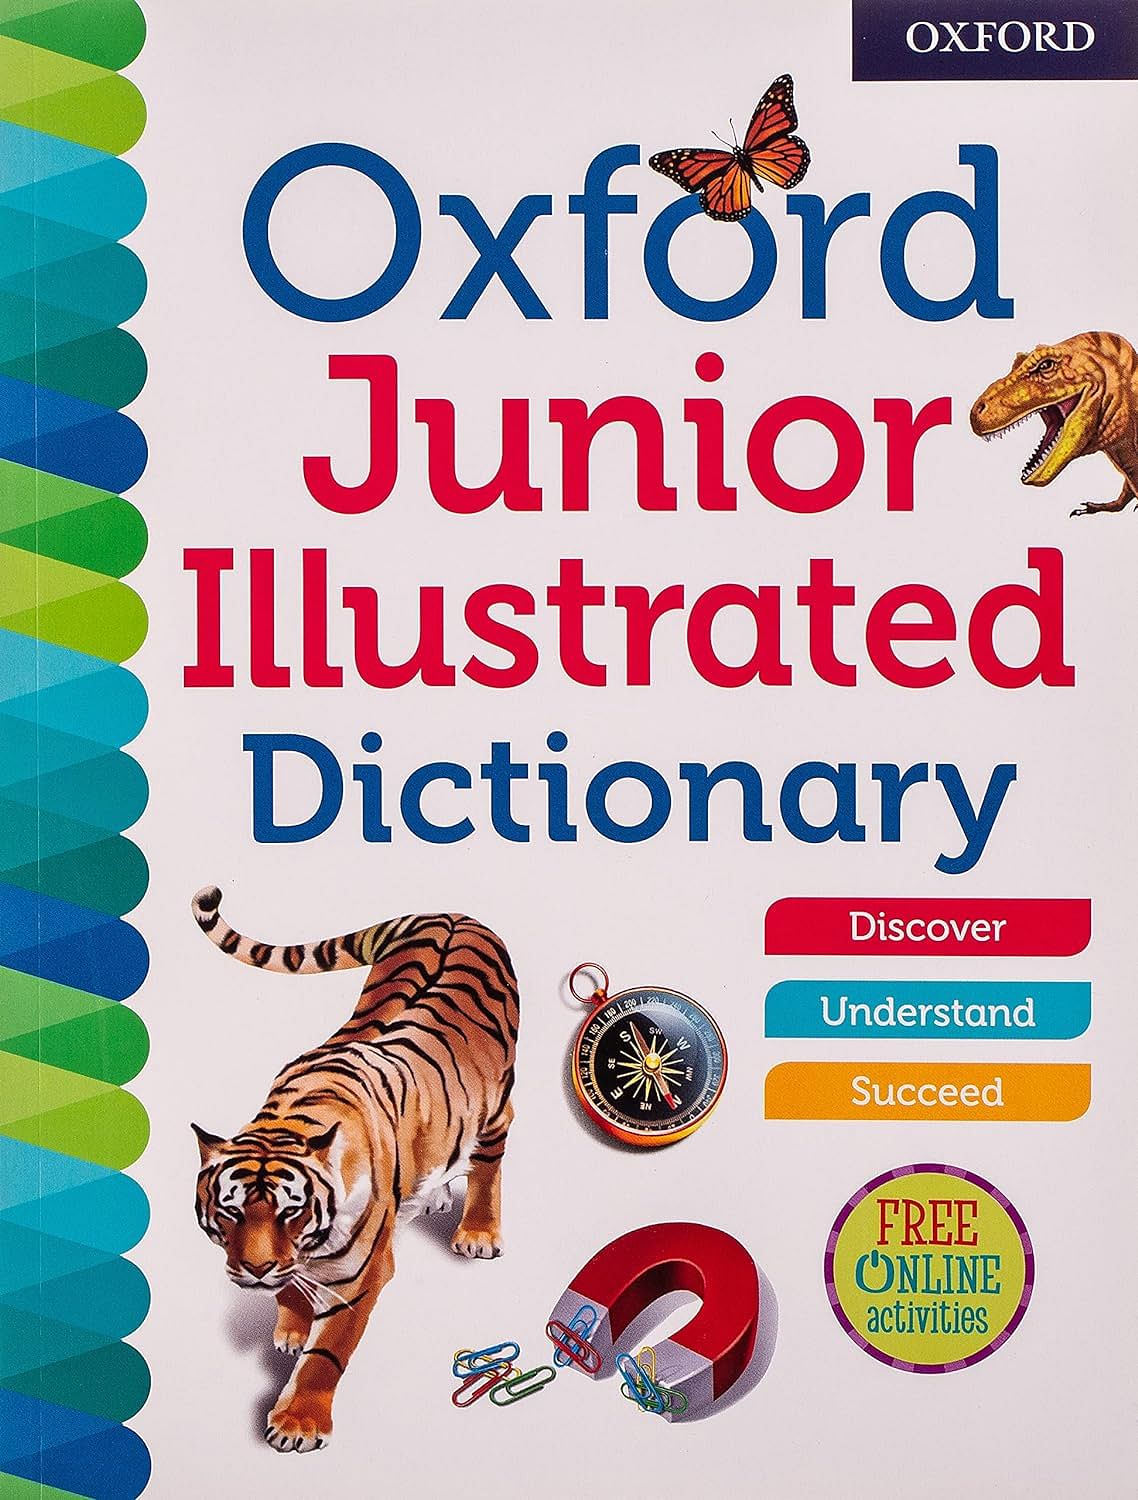 Oxford Junior Illustrated Dictionary (Paperback)